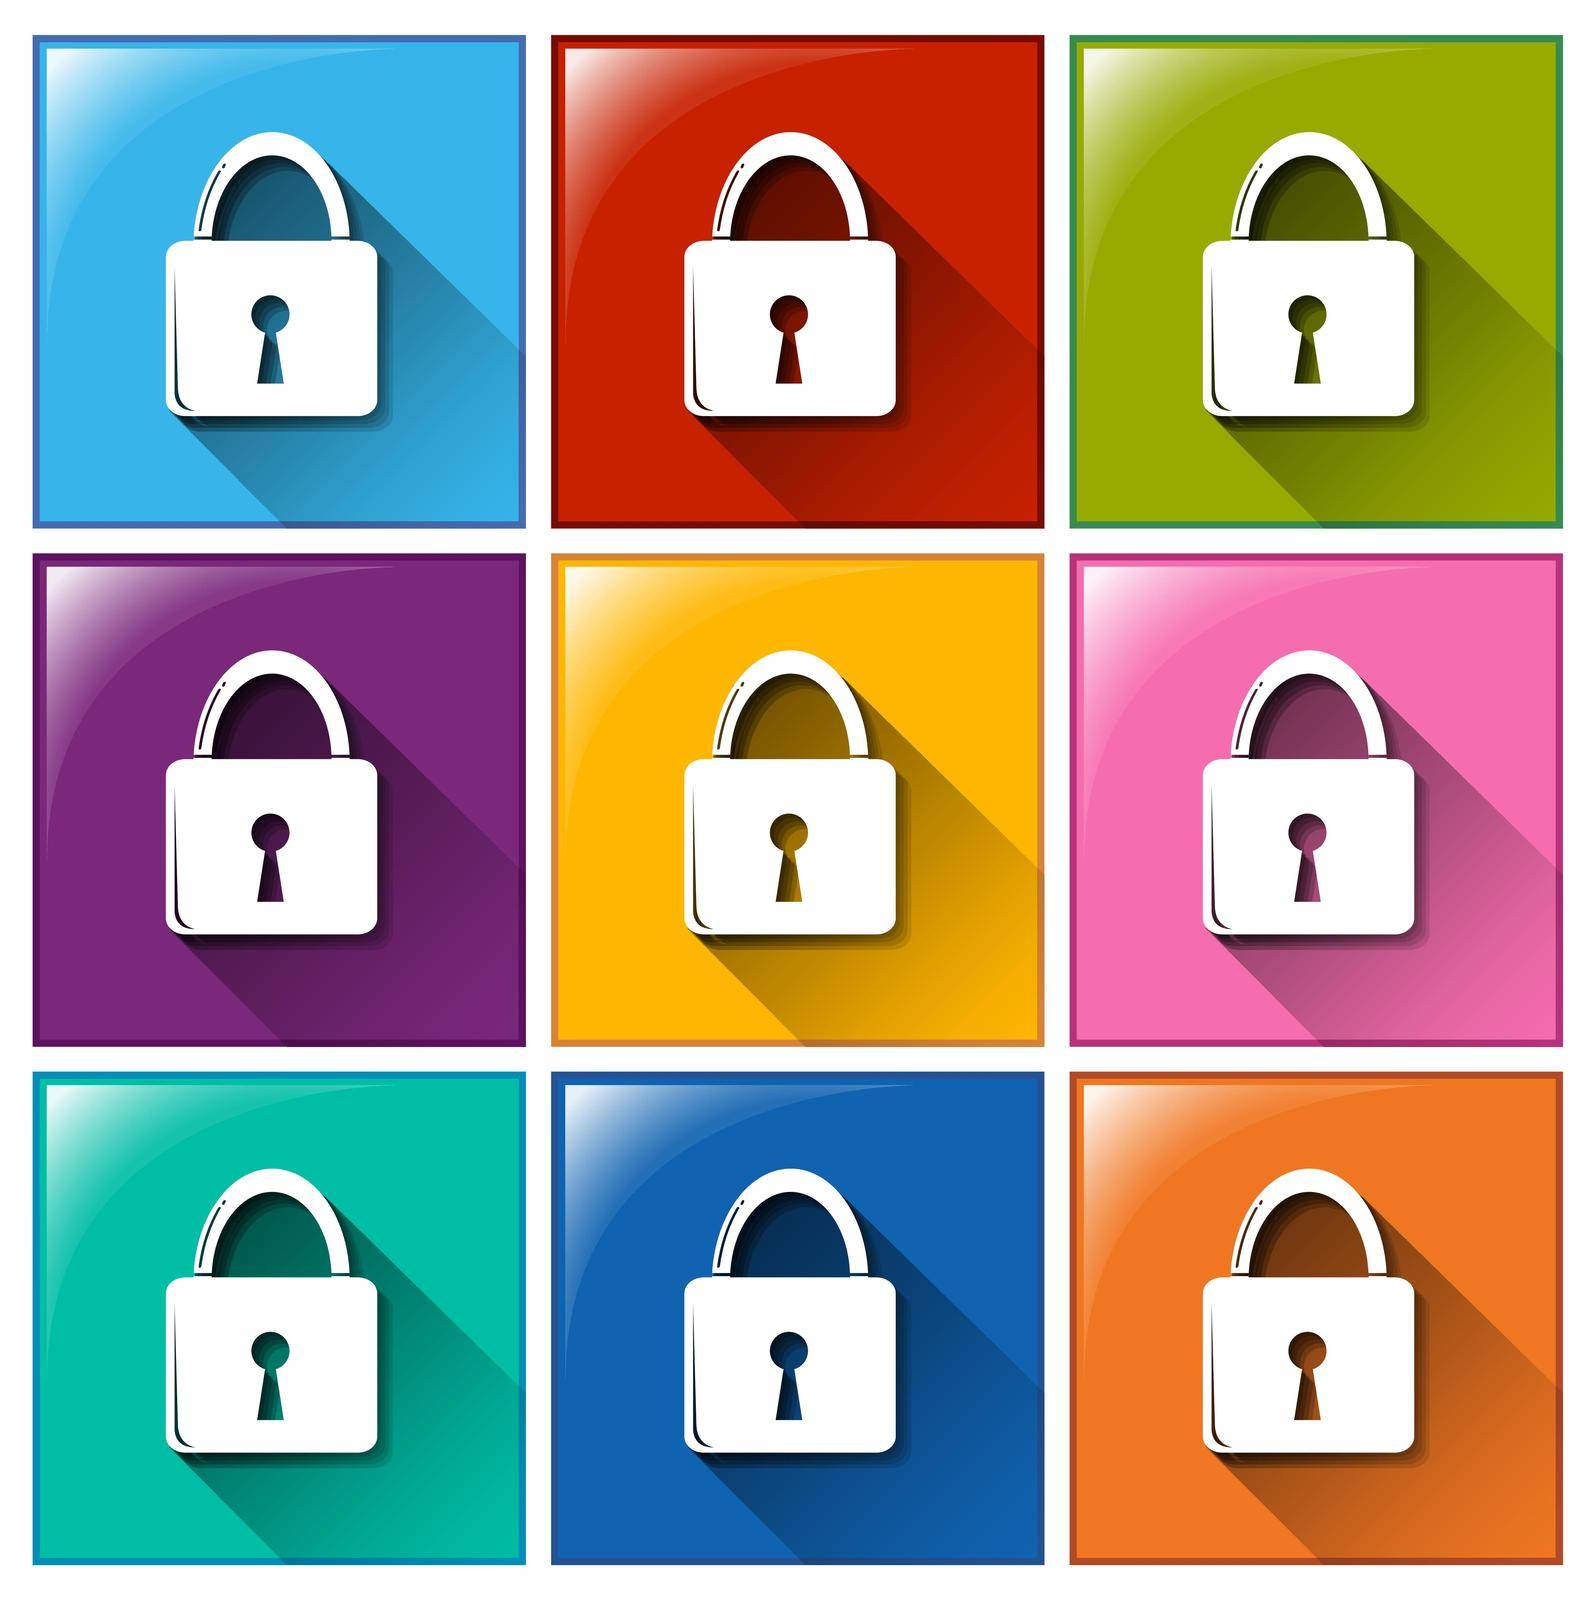 Illustration of different color lock icons